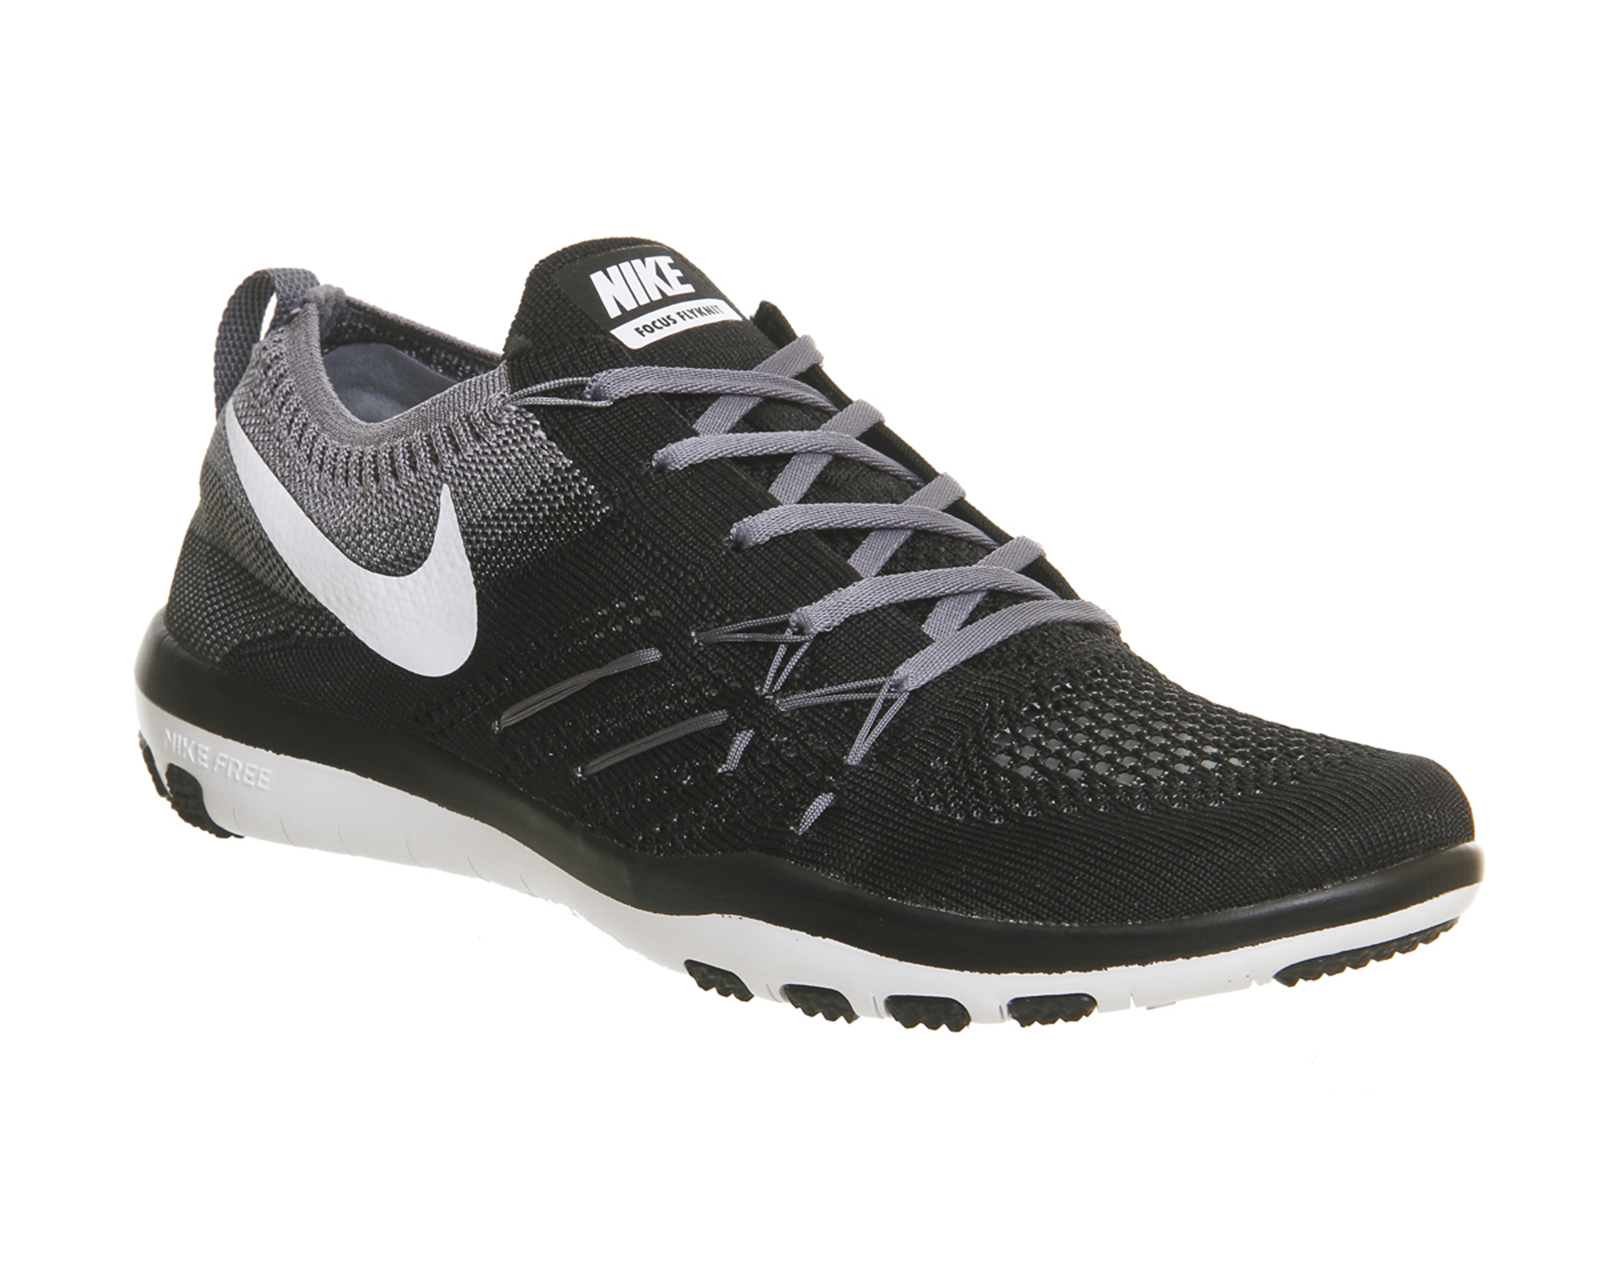 Nike Wmns Free Tr Focus Flyknit Black White Cool Grey - Hers trainers